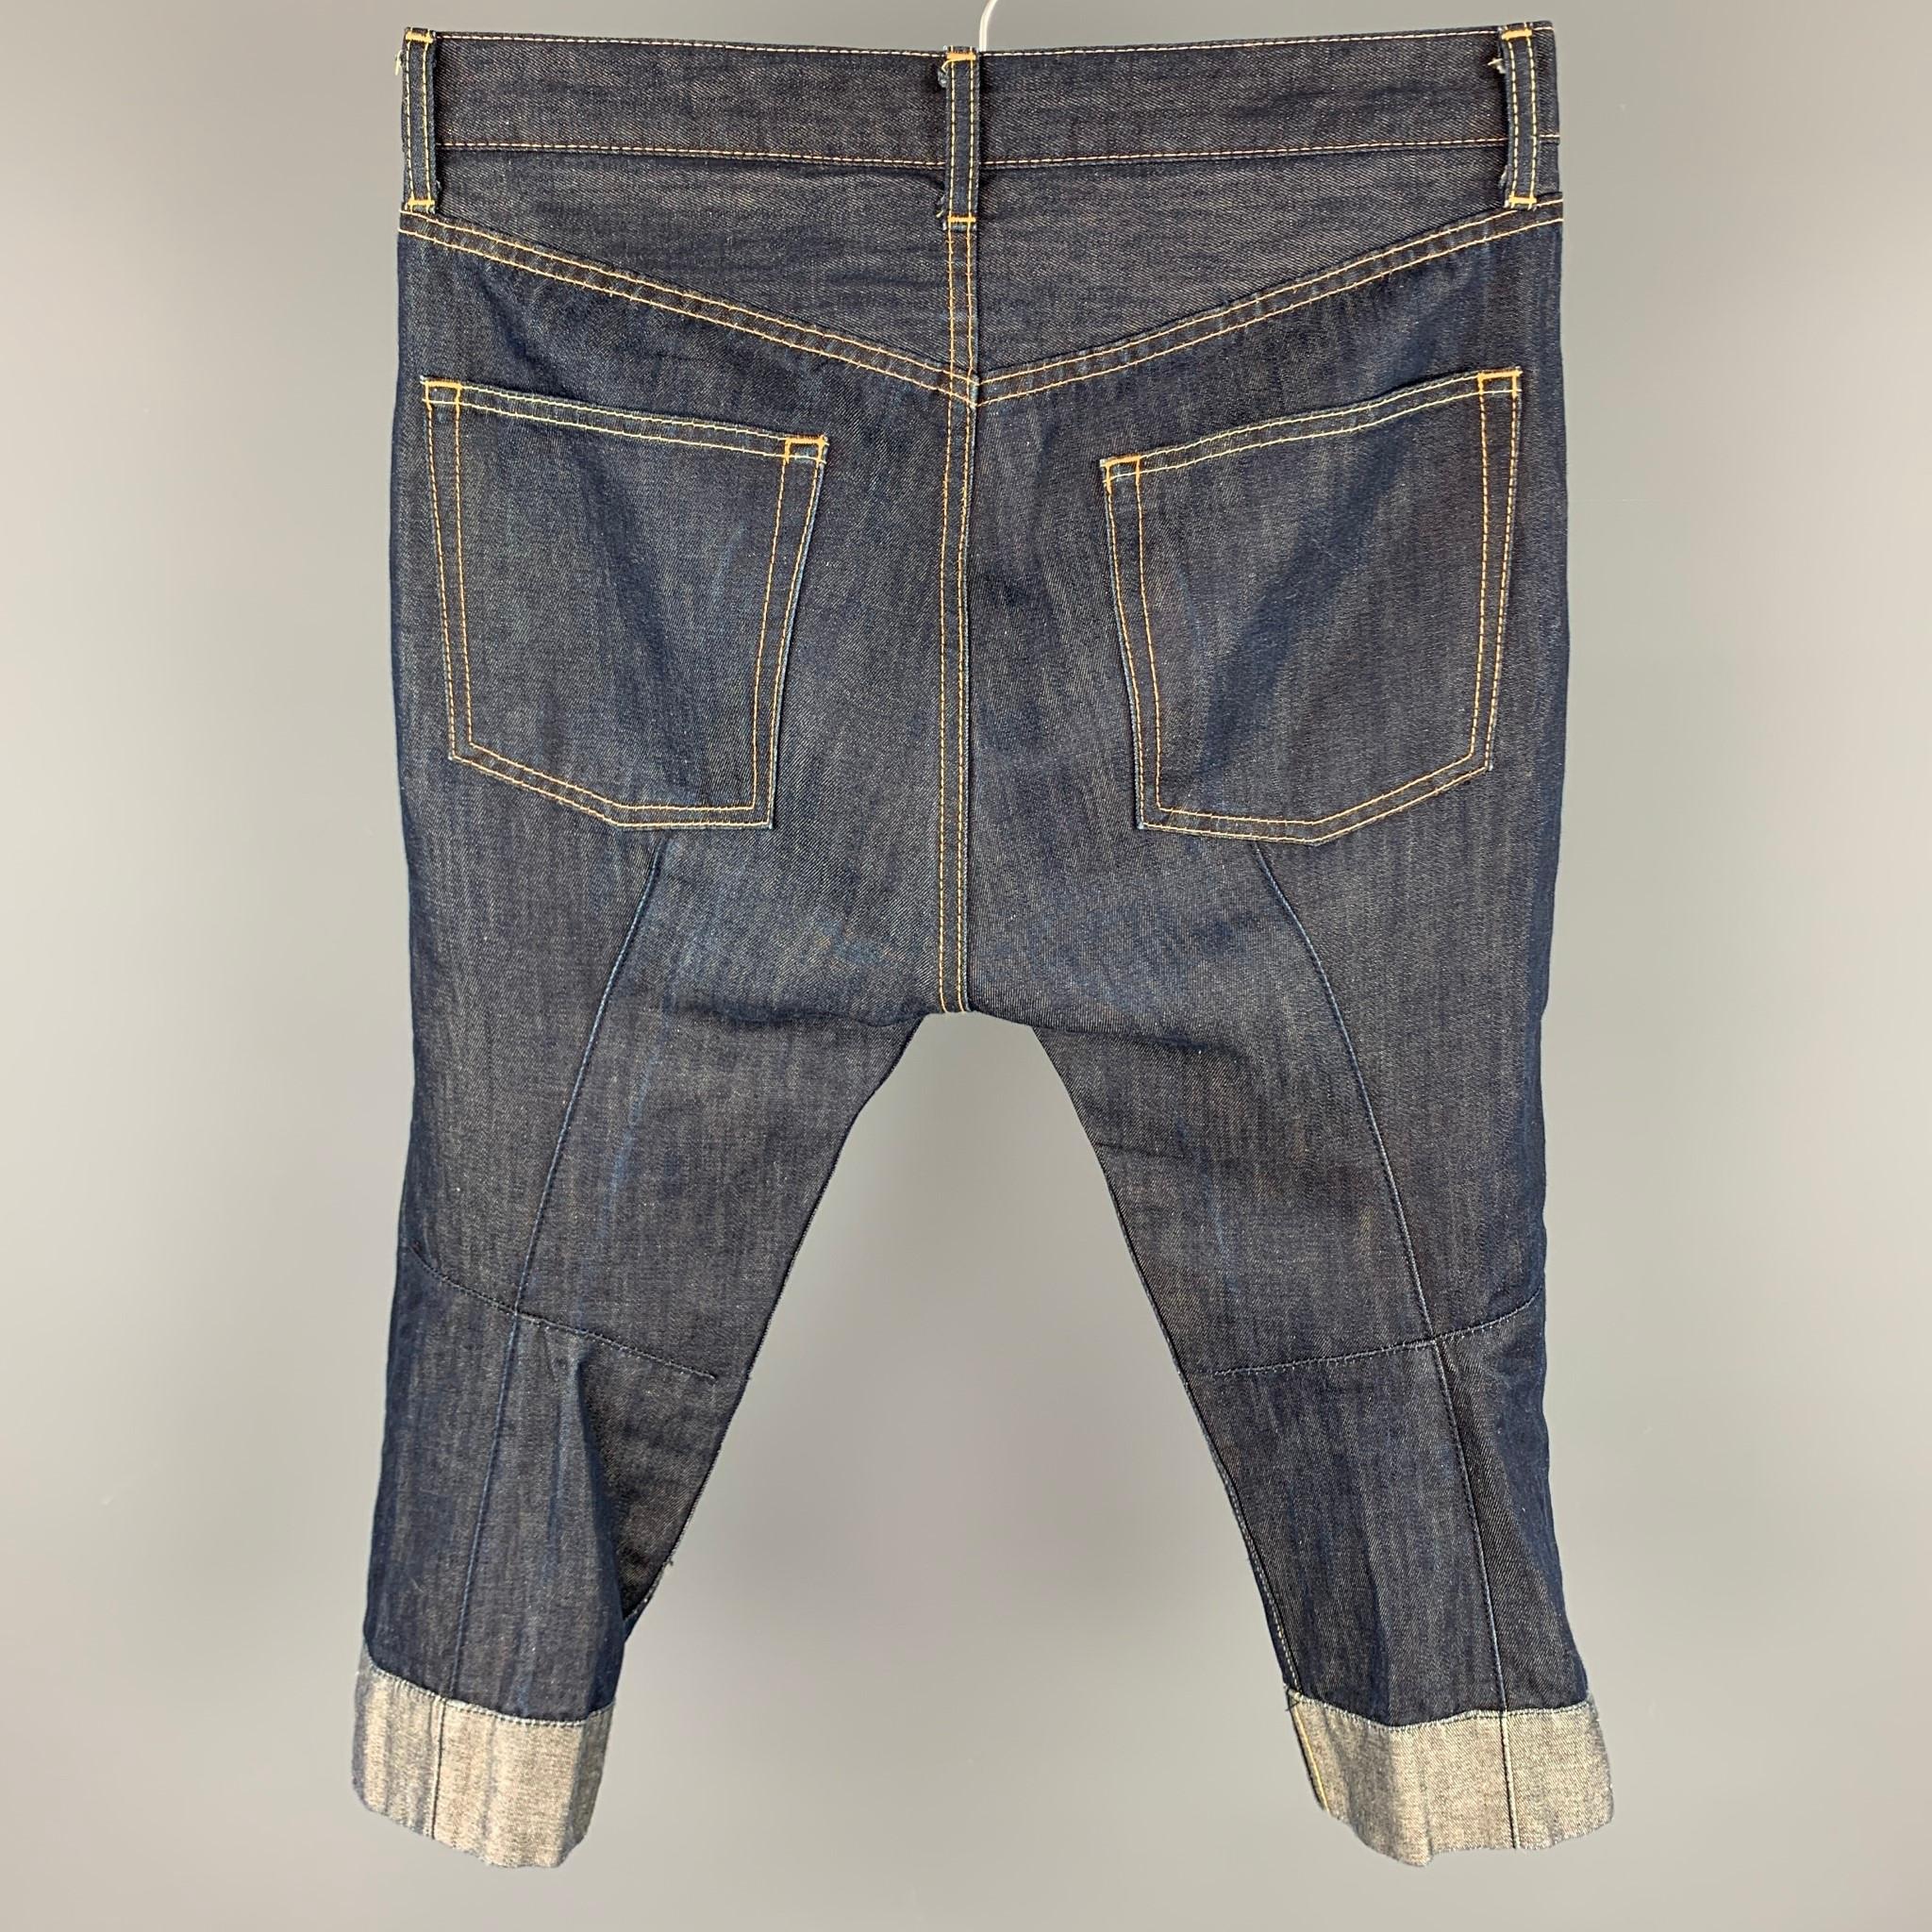 JUNYA WATANABE jeans comes in a indigo denim with contrast stitching featuring a cropped leg, folded, top stitching, and a zip fly closure. Made in Japan. 

Very Good Pre-Owned Condition.
Marked: SS / AD2008

Measurements:

Waist: 32 in.
Rise: 12